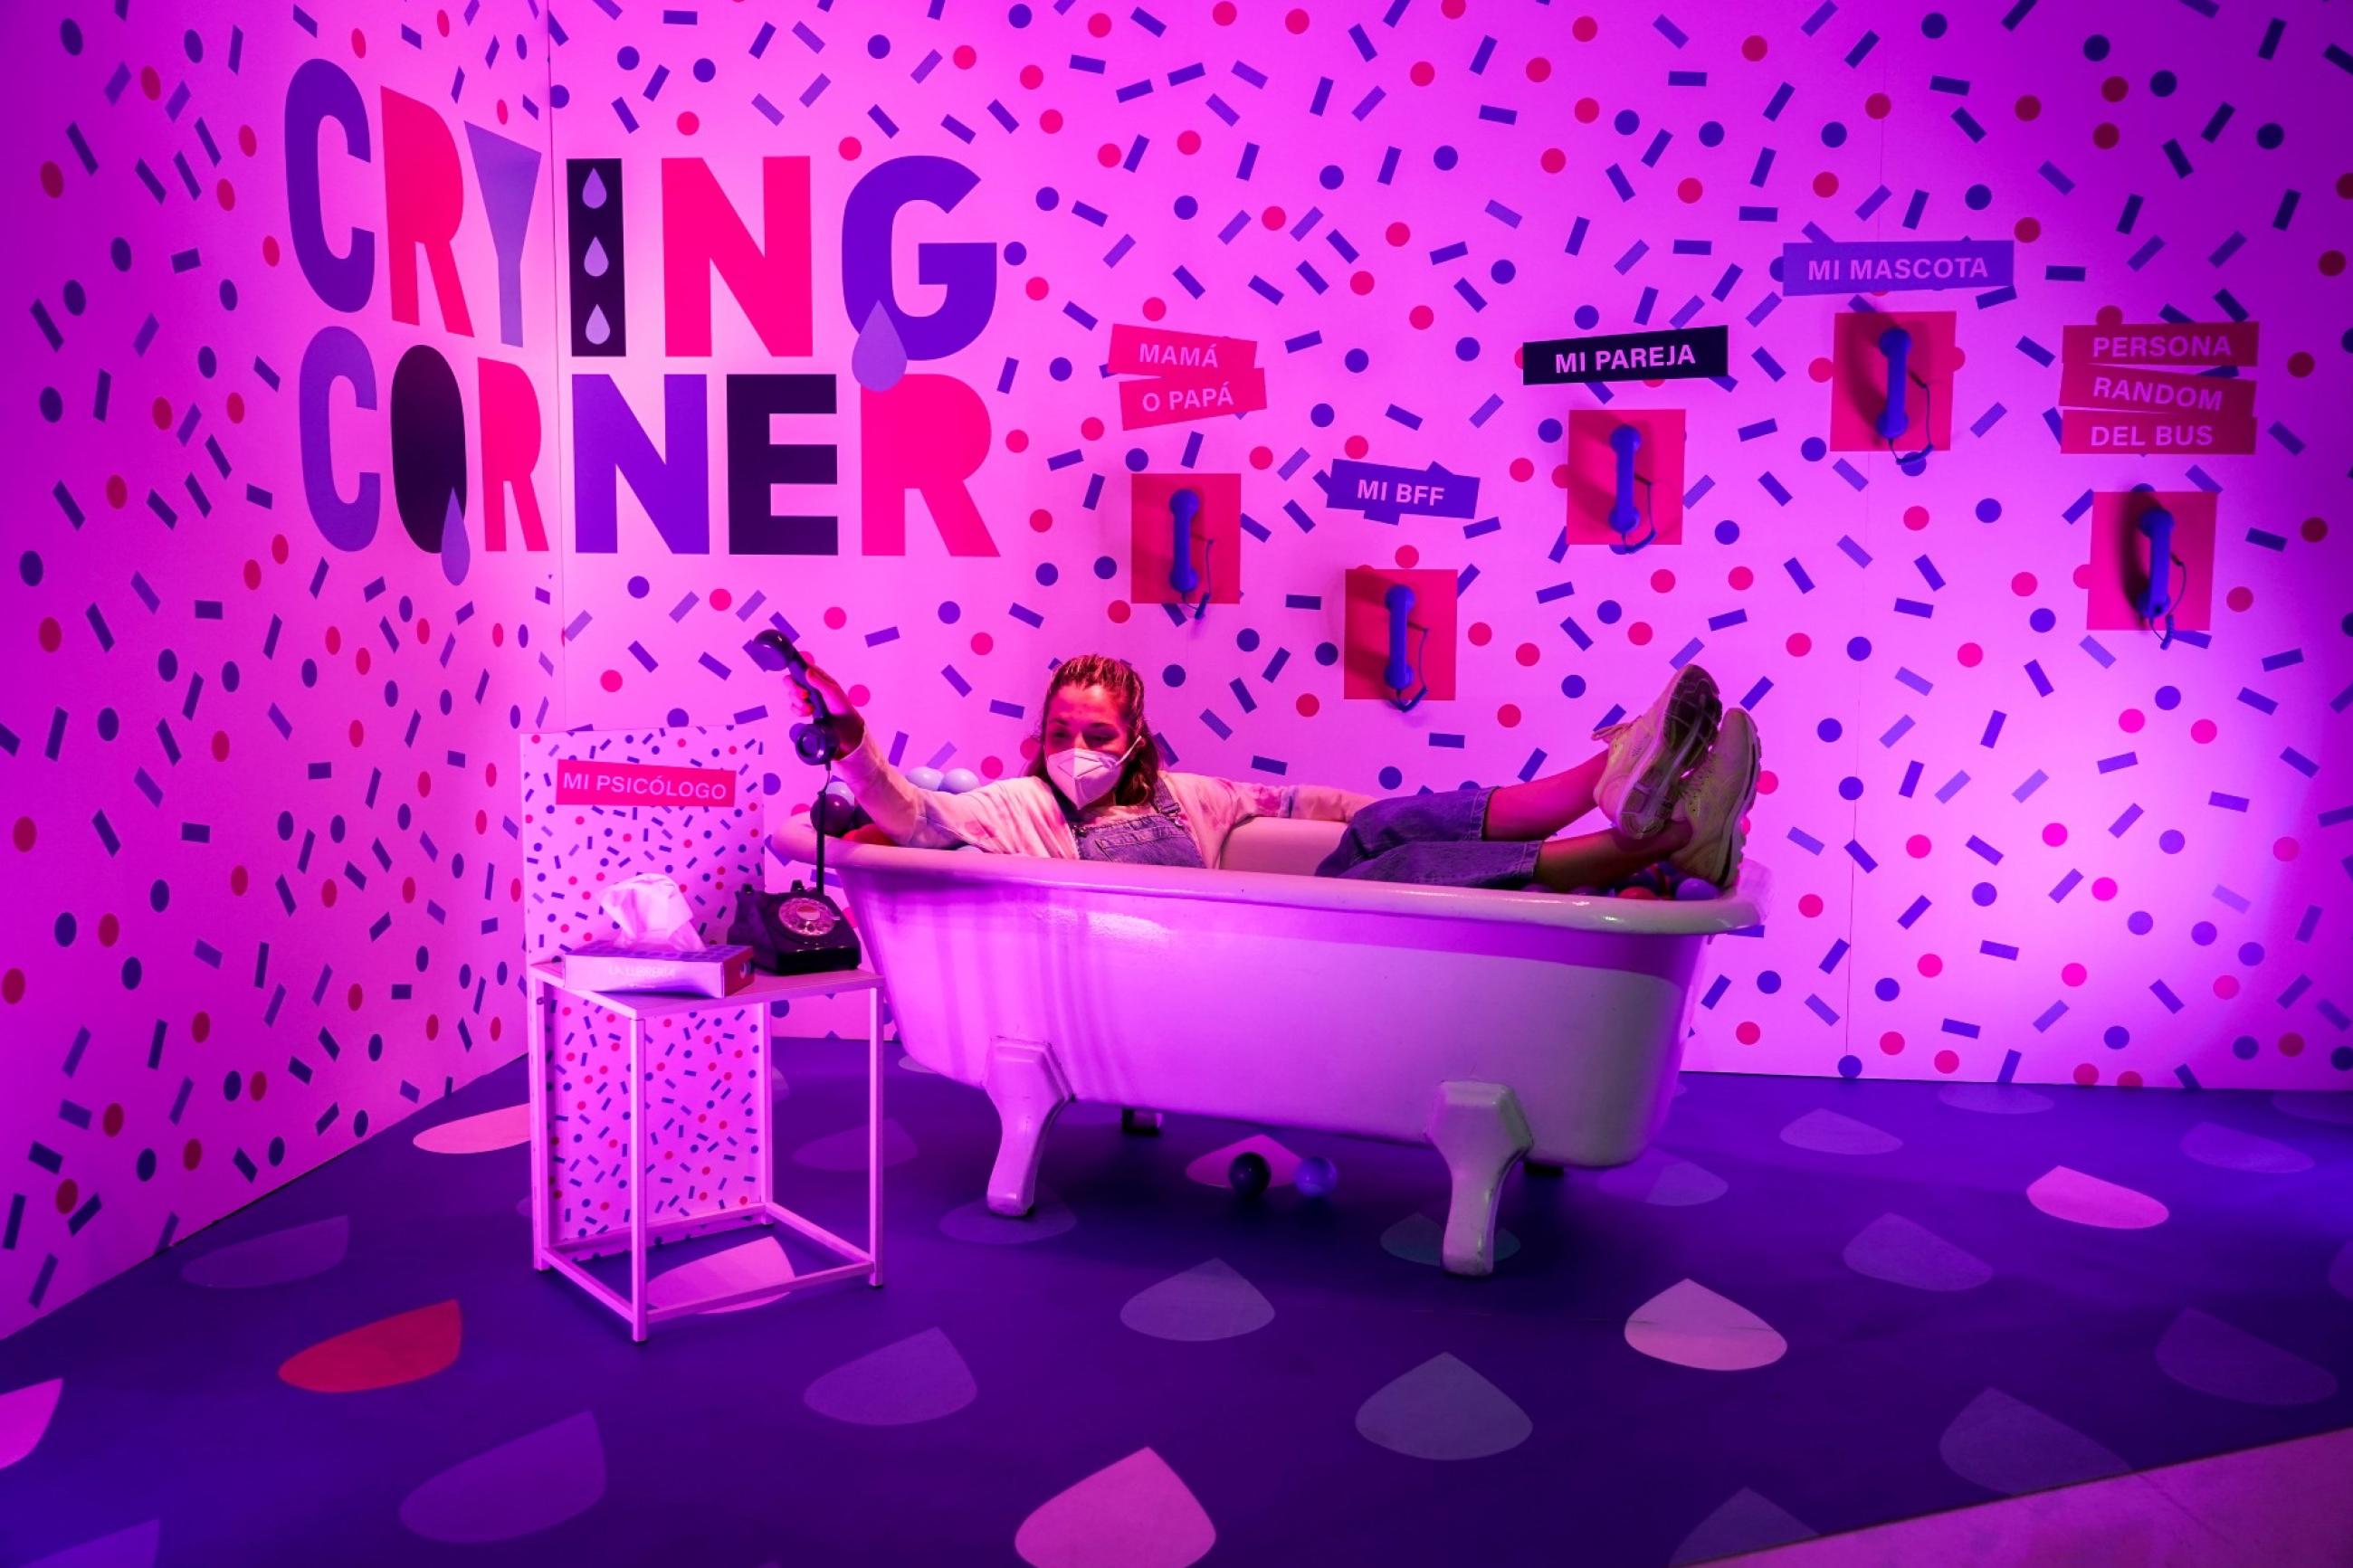 a woman poses in a bathtub in a pink room